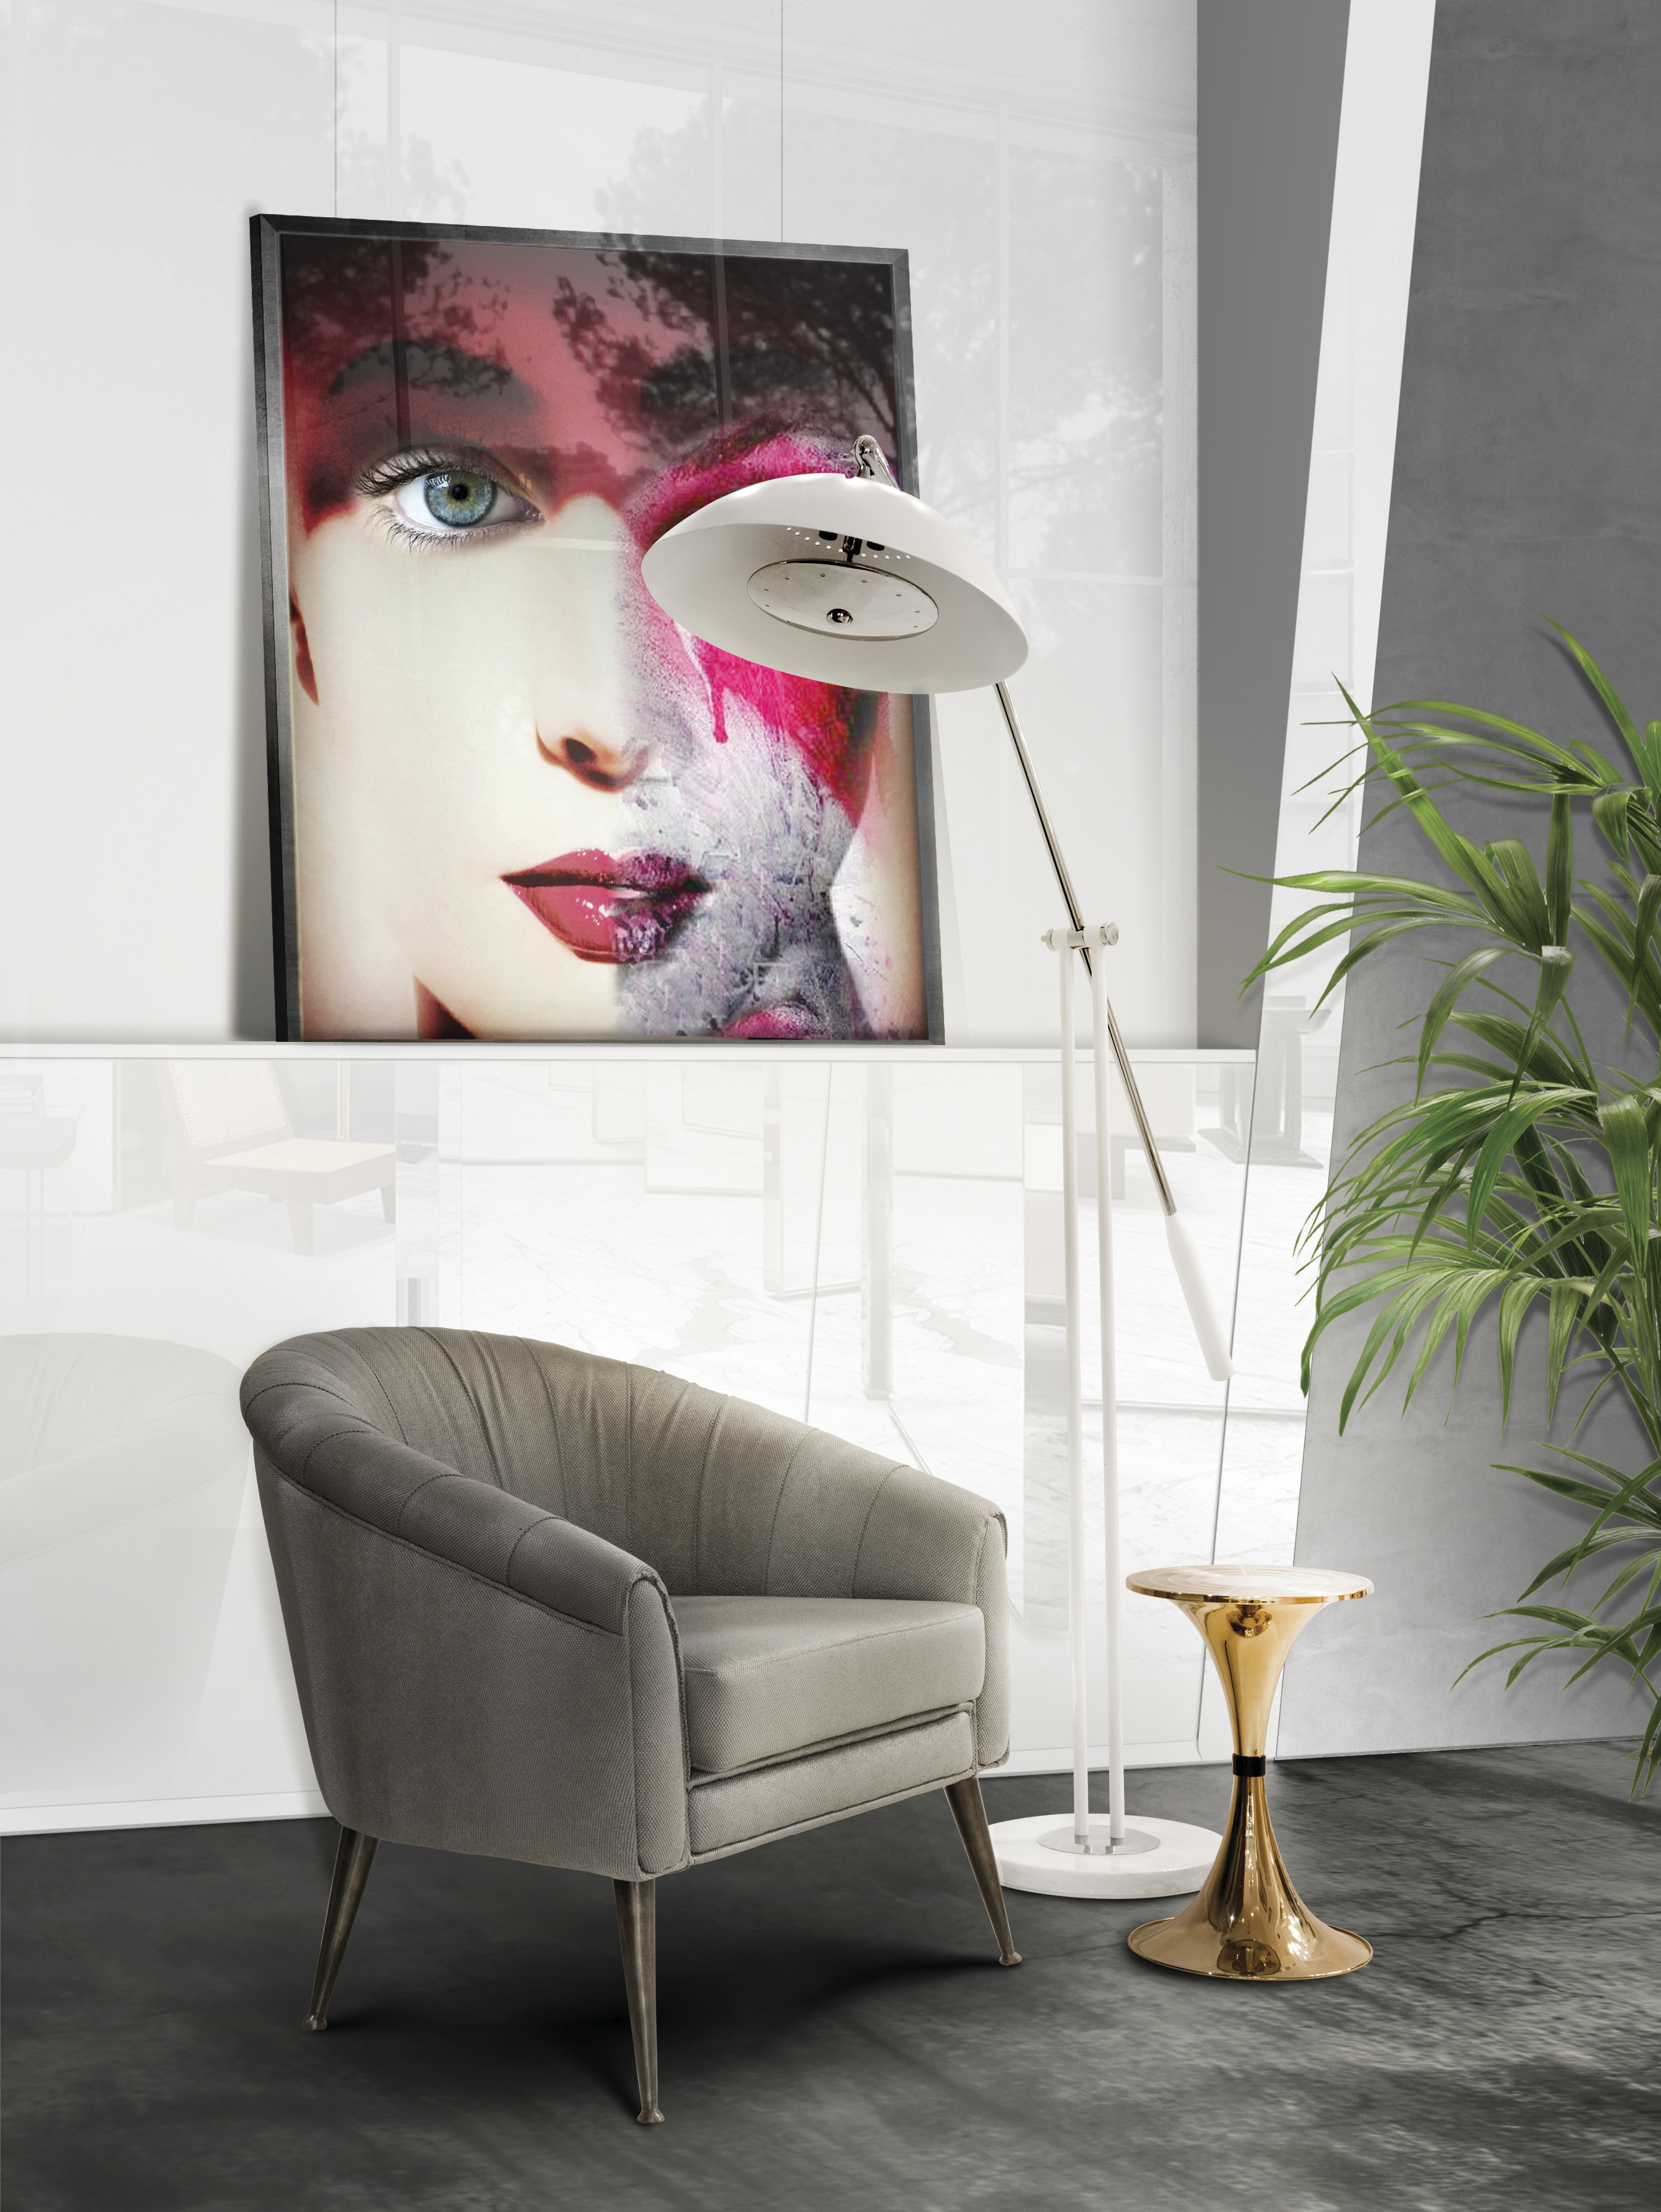 Floor Lamps Essentials An Arc Floor Lamp Ideal for Every Style (1)